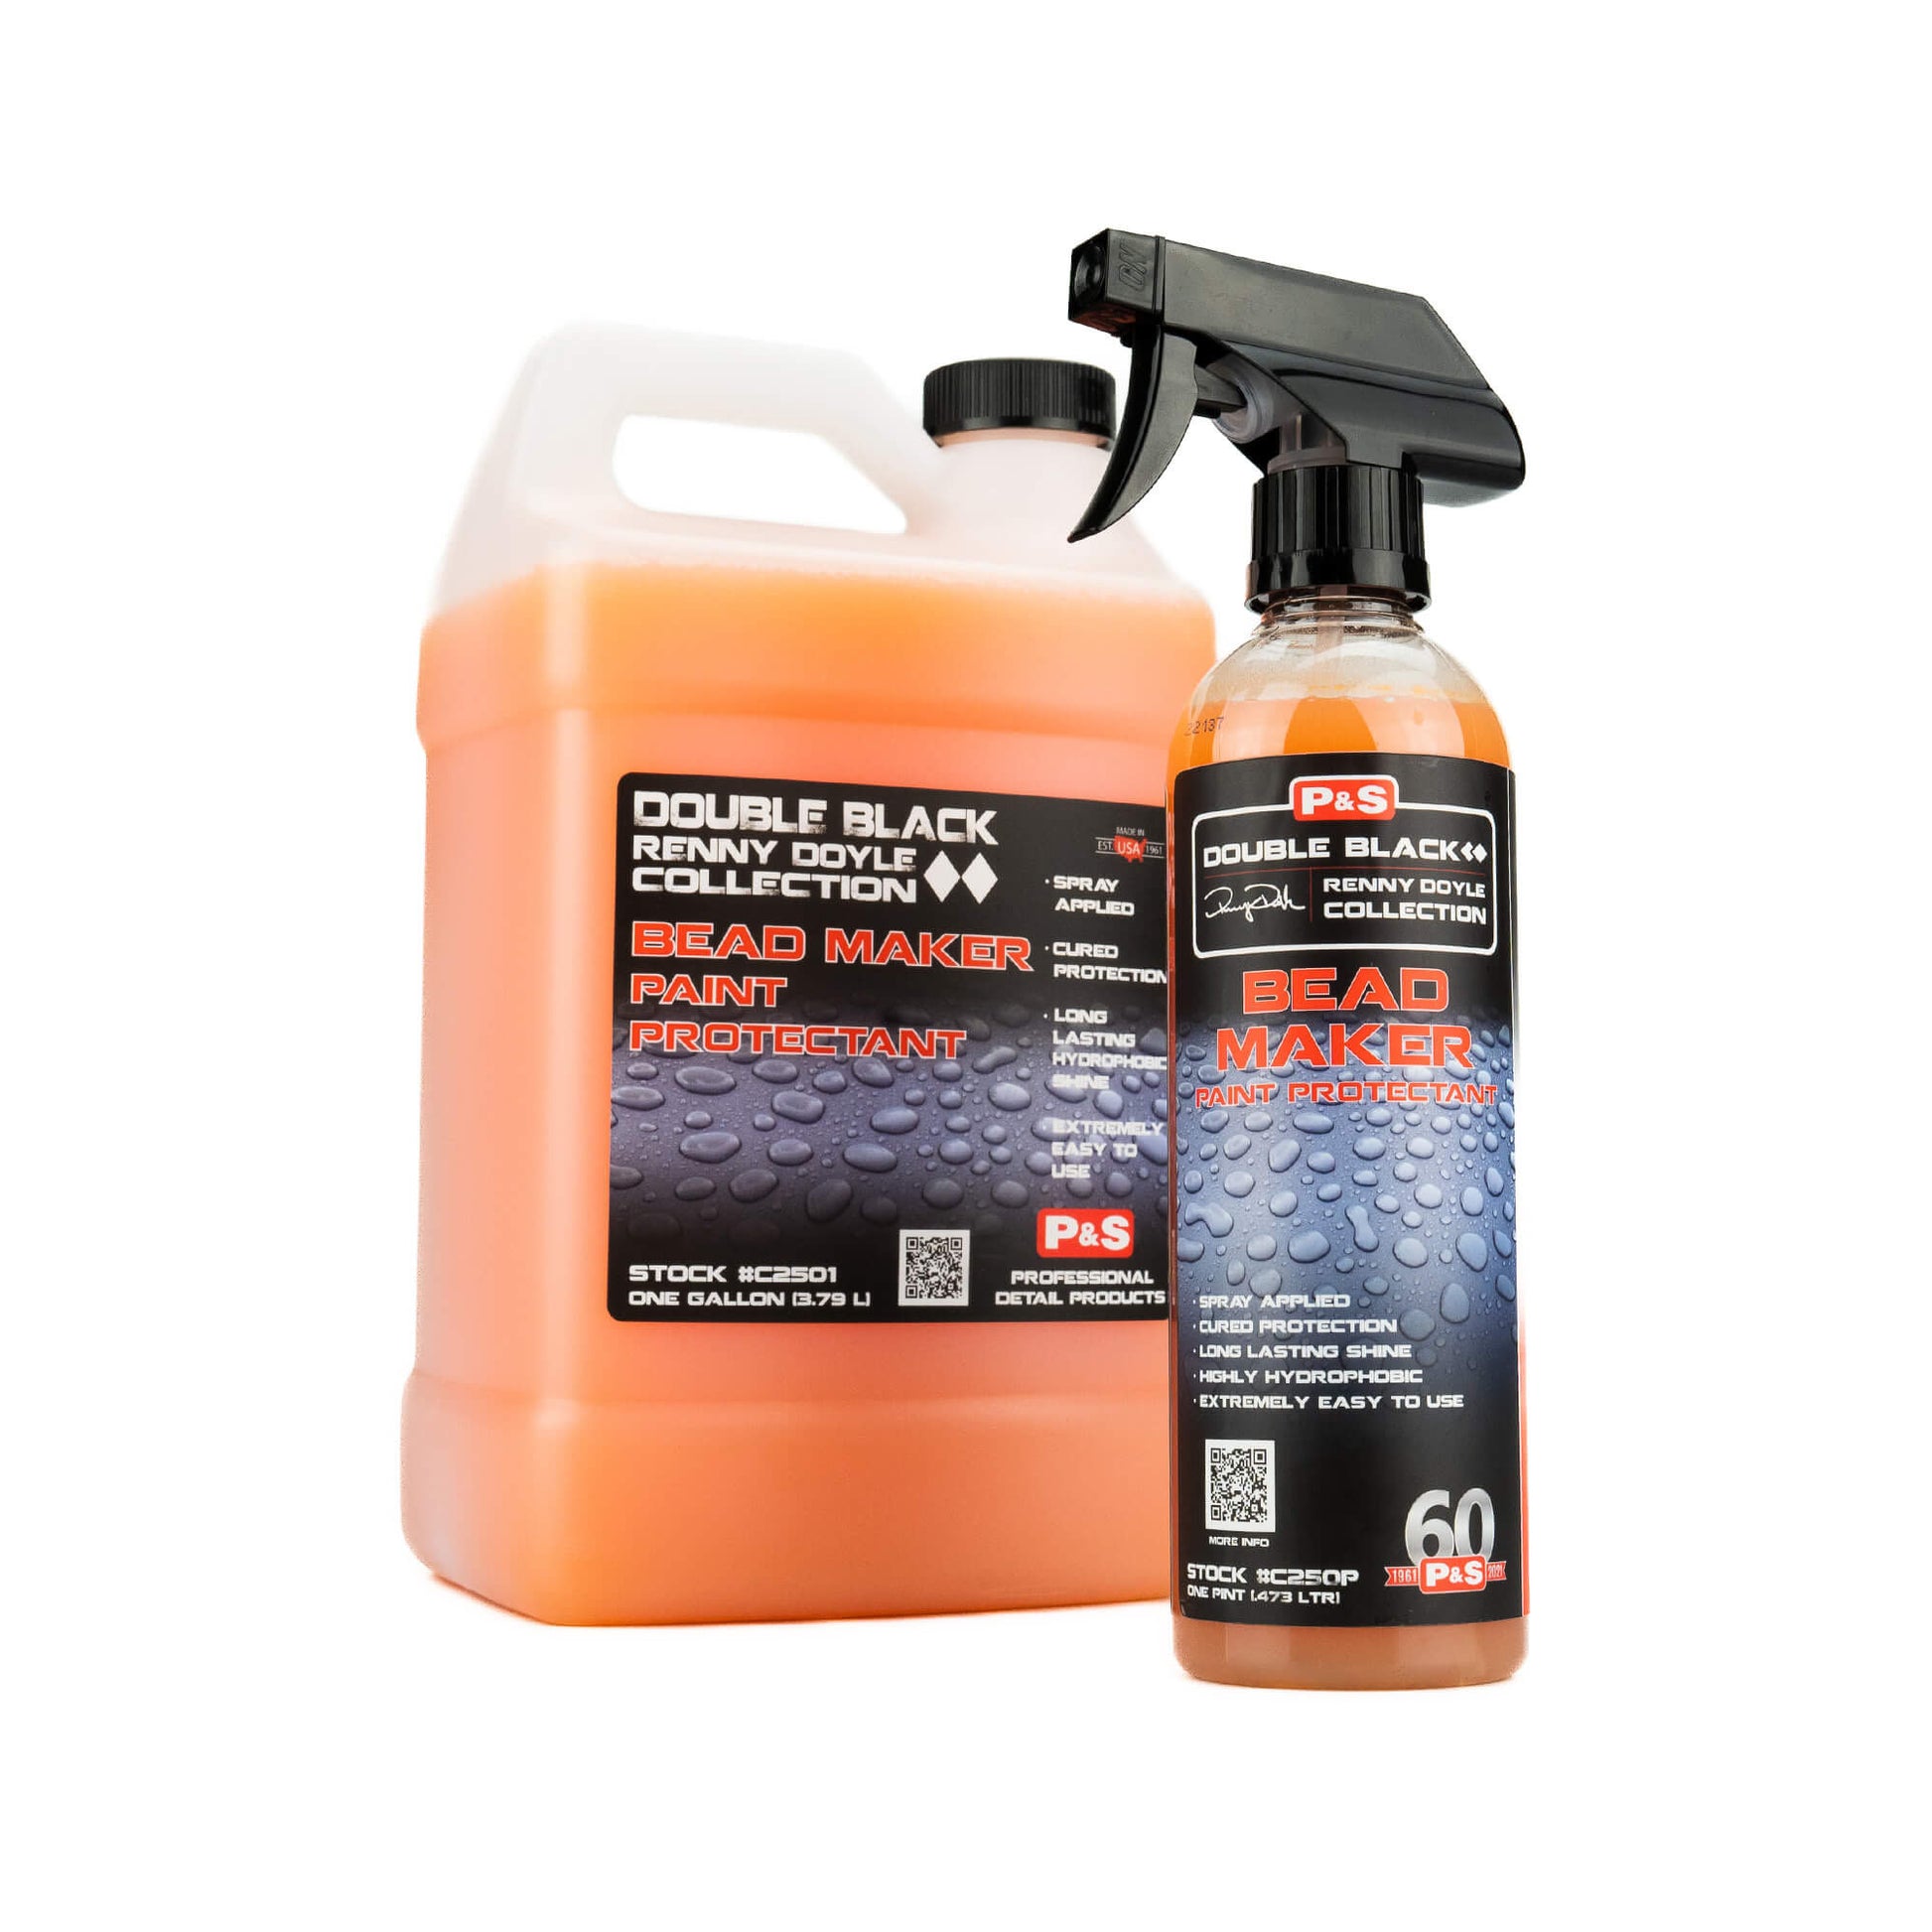 P&S Detail Products - Bead Maker Paint Protectant | The Rag Company